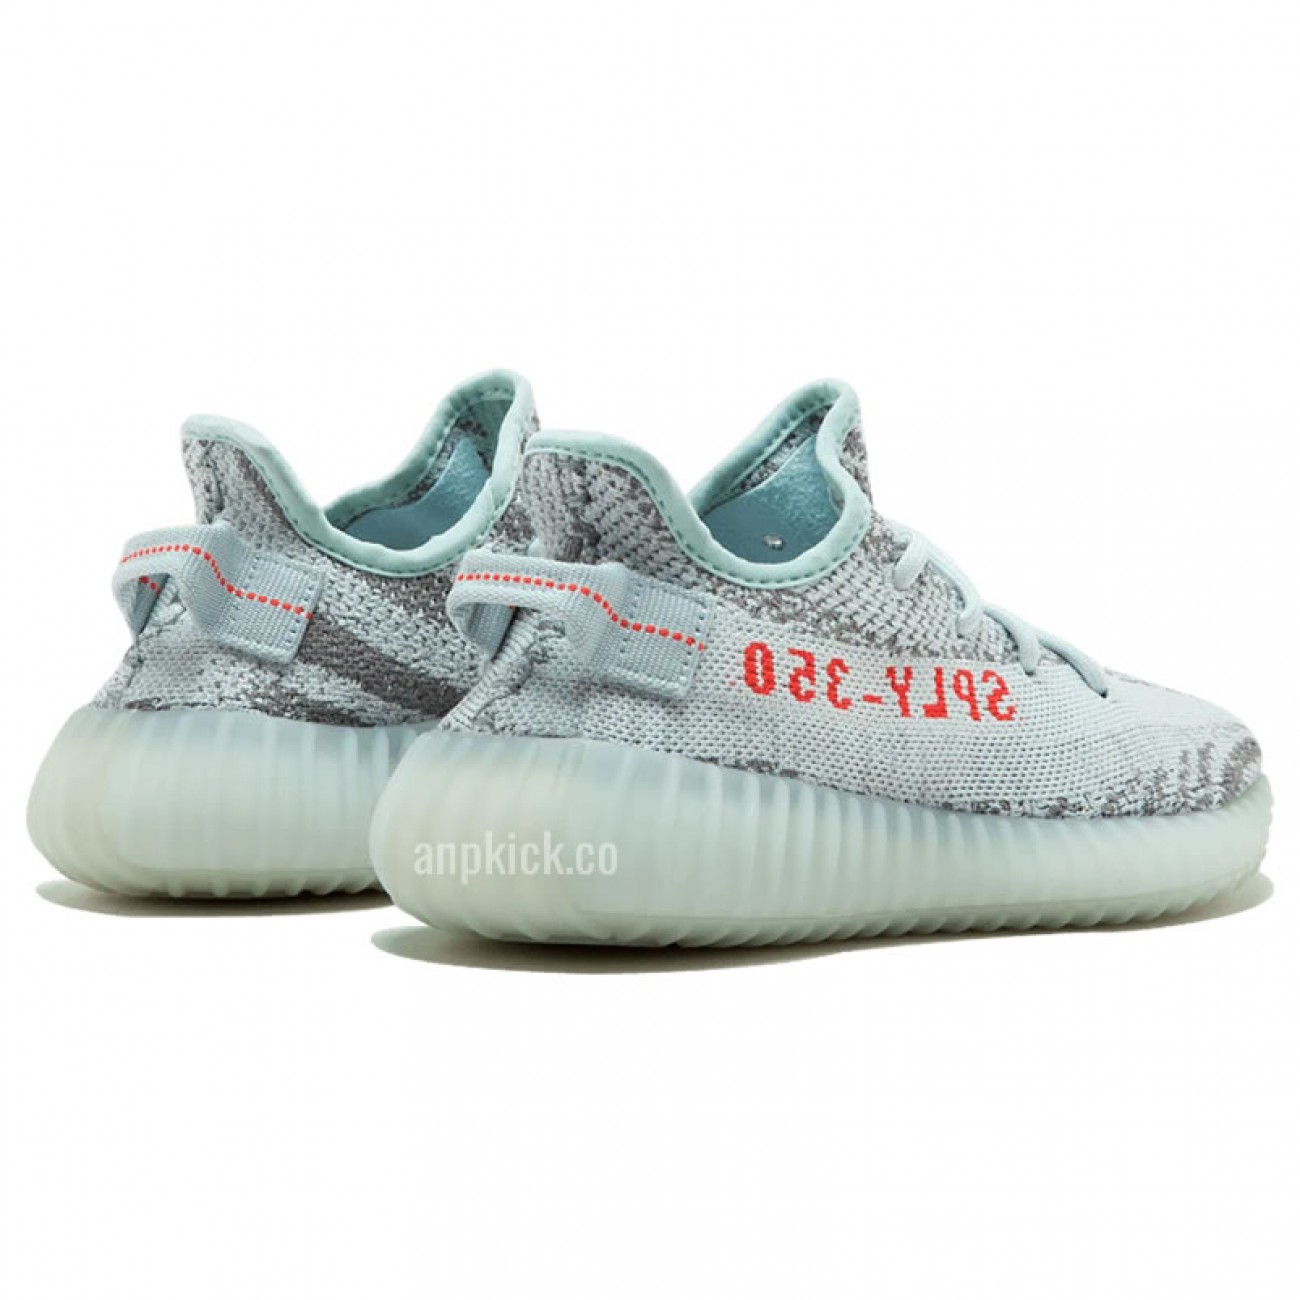 adidas Yeezy Boost 350 V2 "Blue Tint" B37571 New Release Date